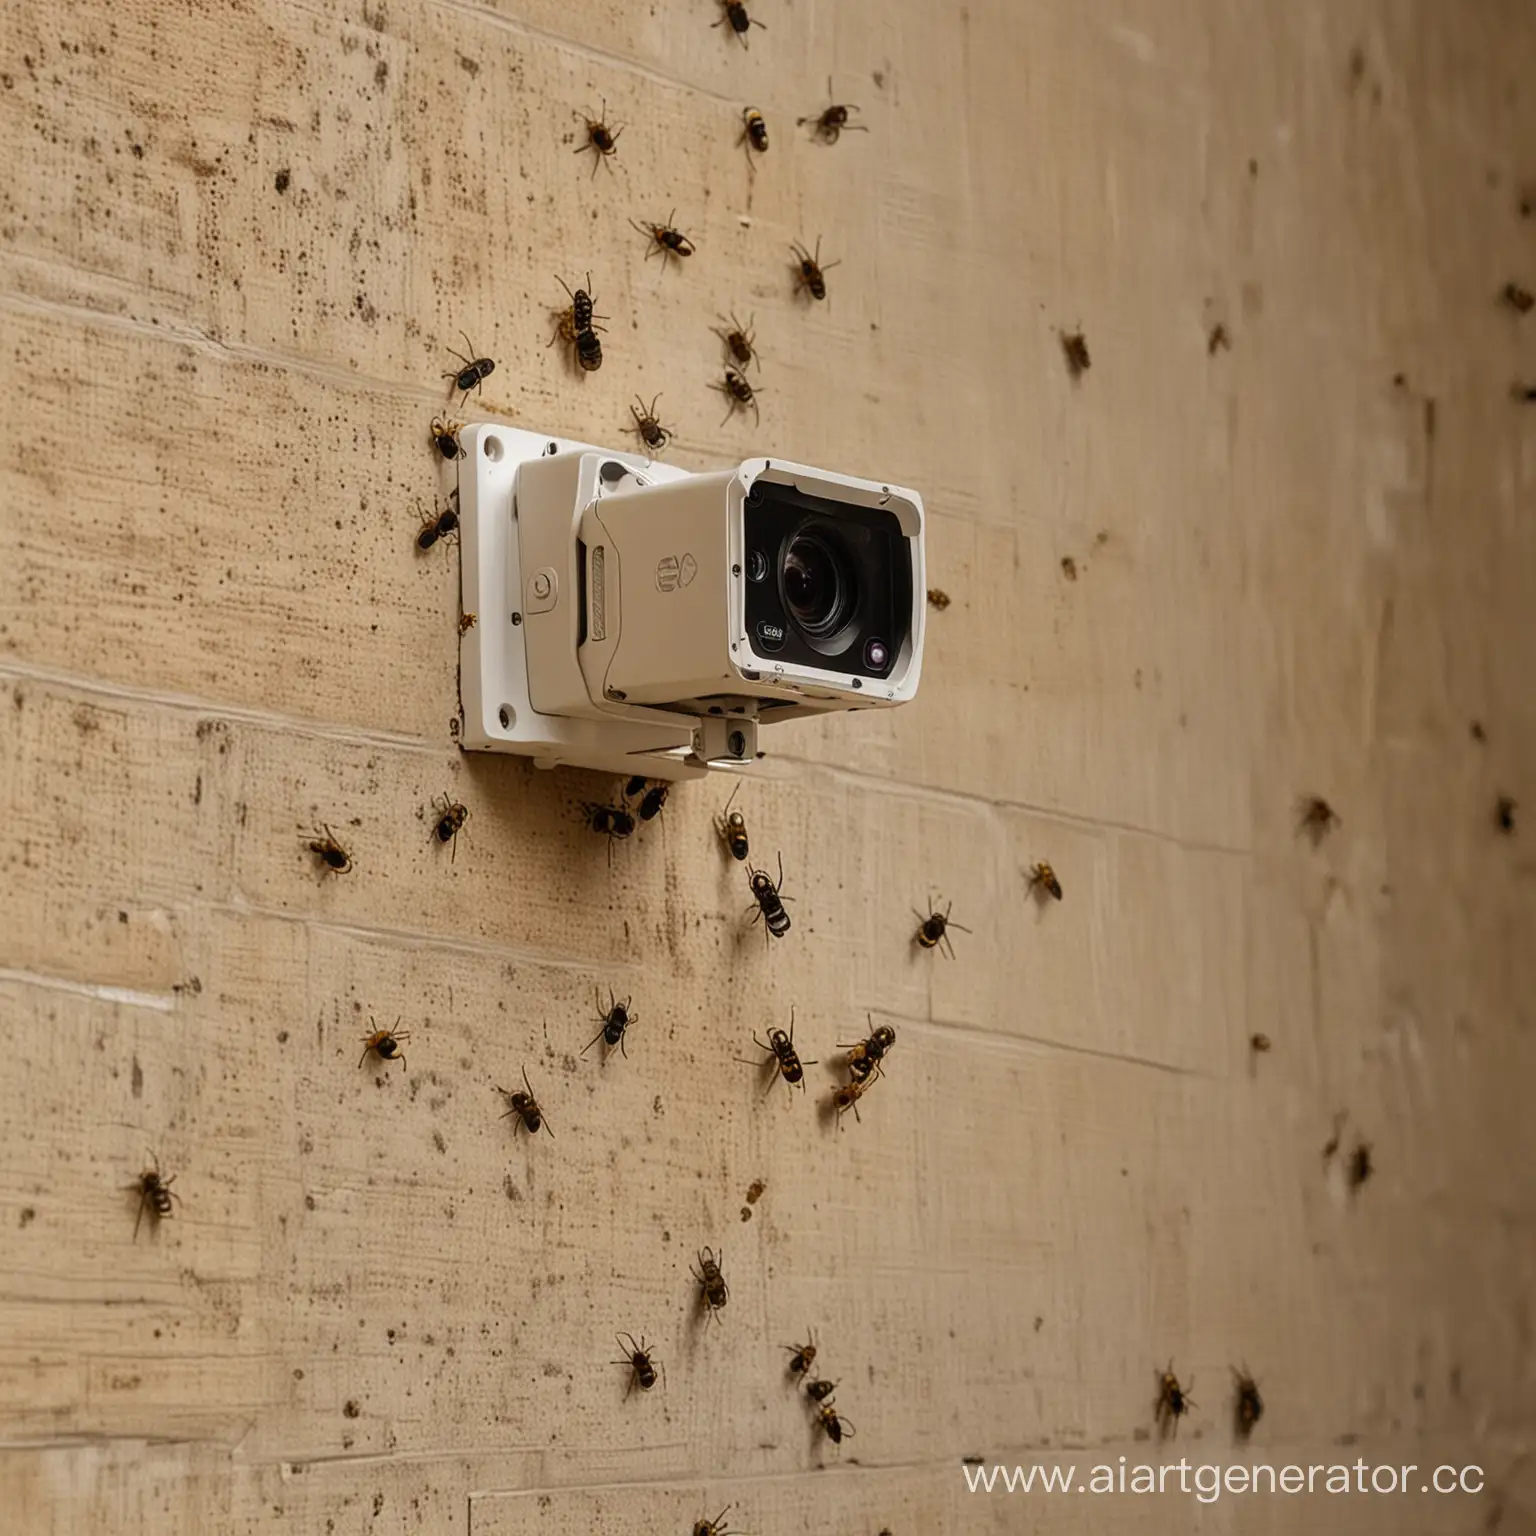 Insect-Surveillance-Hive-WallMounted-Camera-Observing-Various-Insects